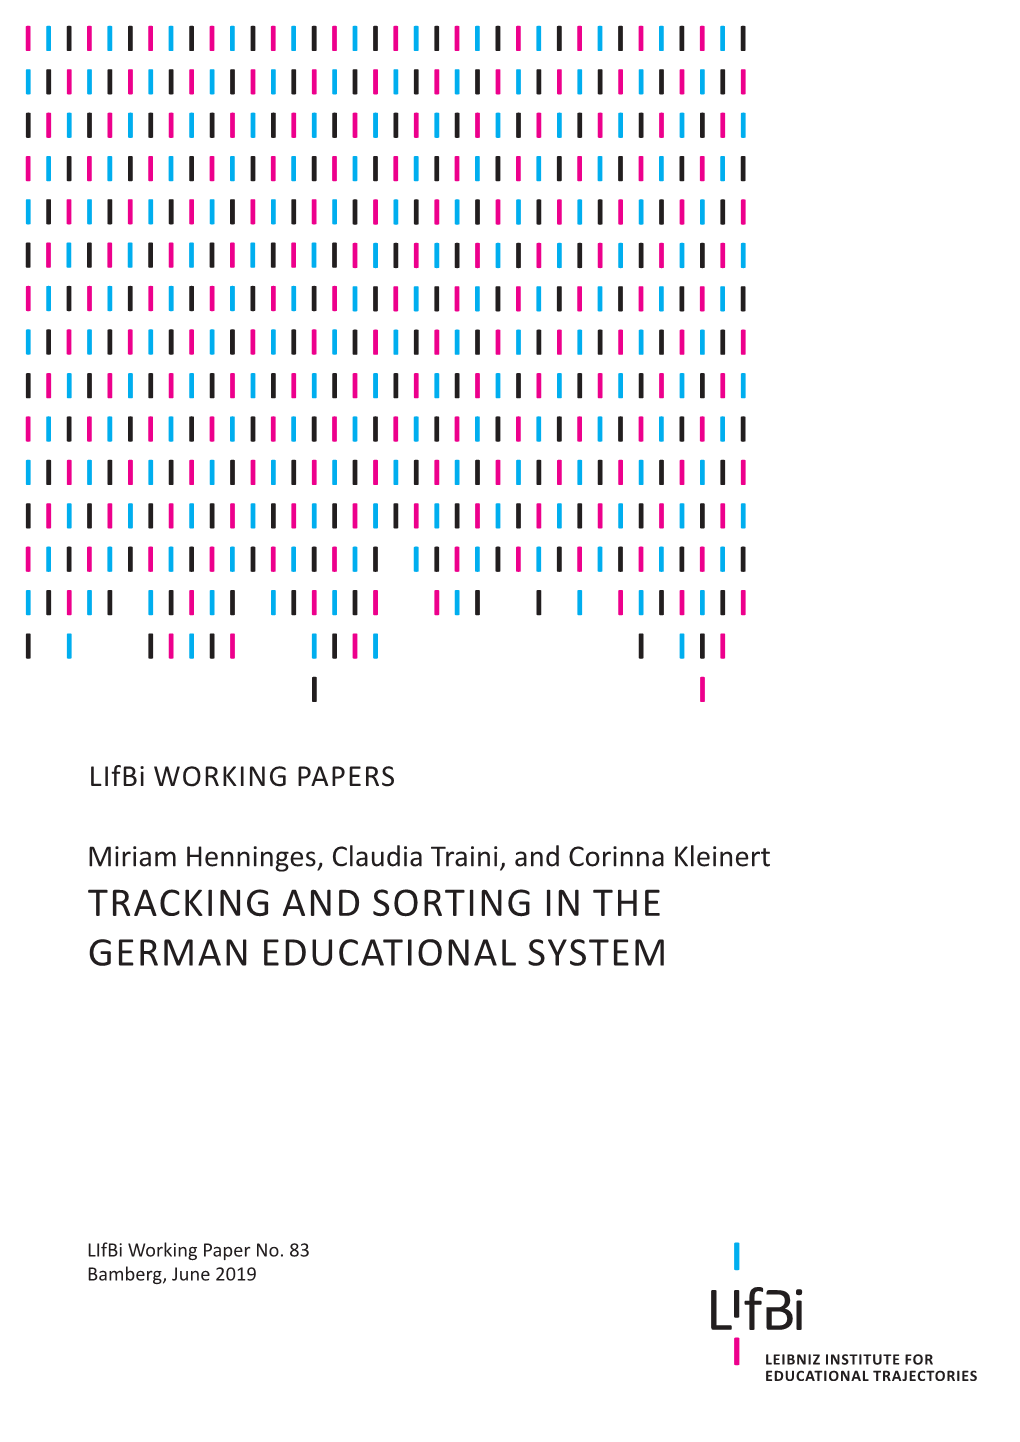 Tracking and Sorting in the German Educational System